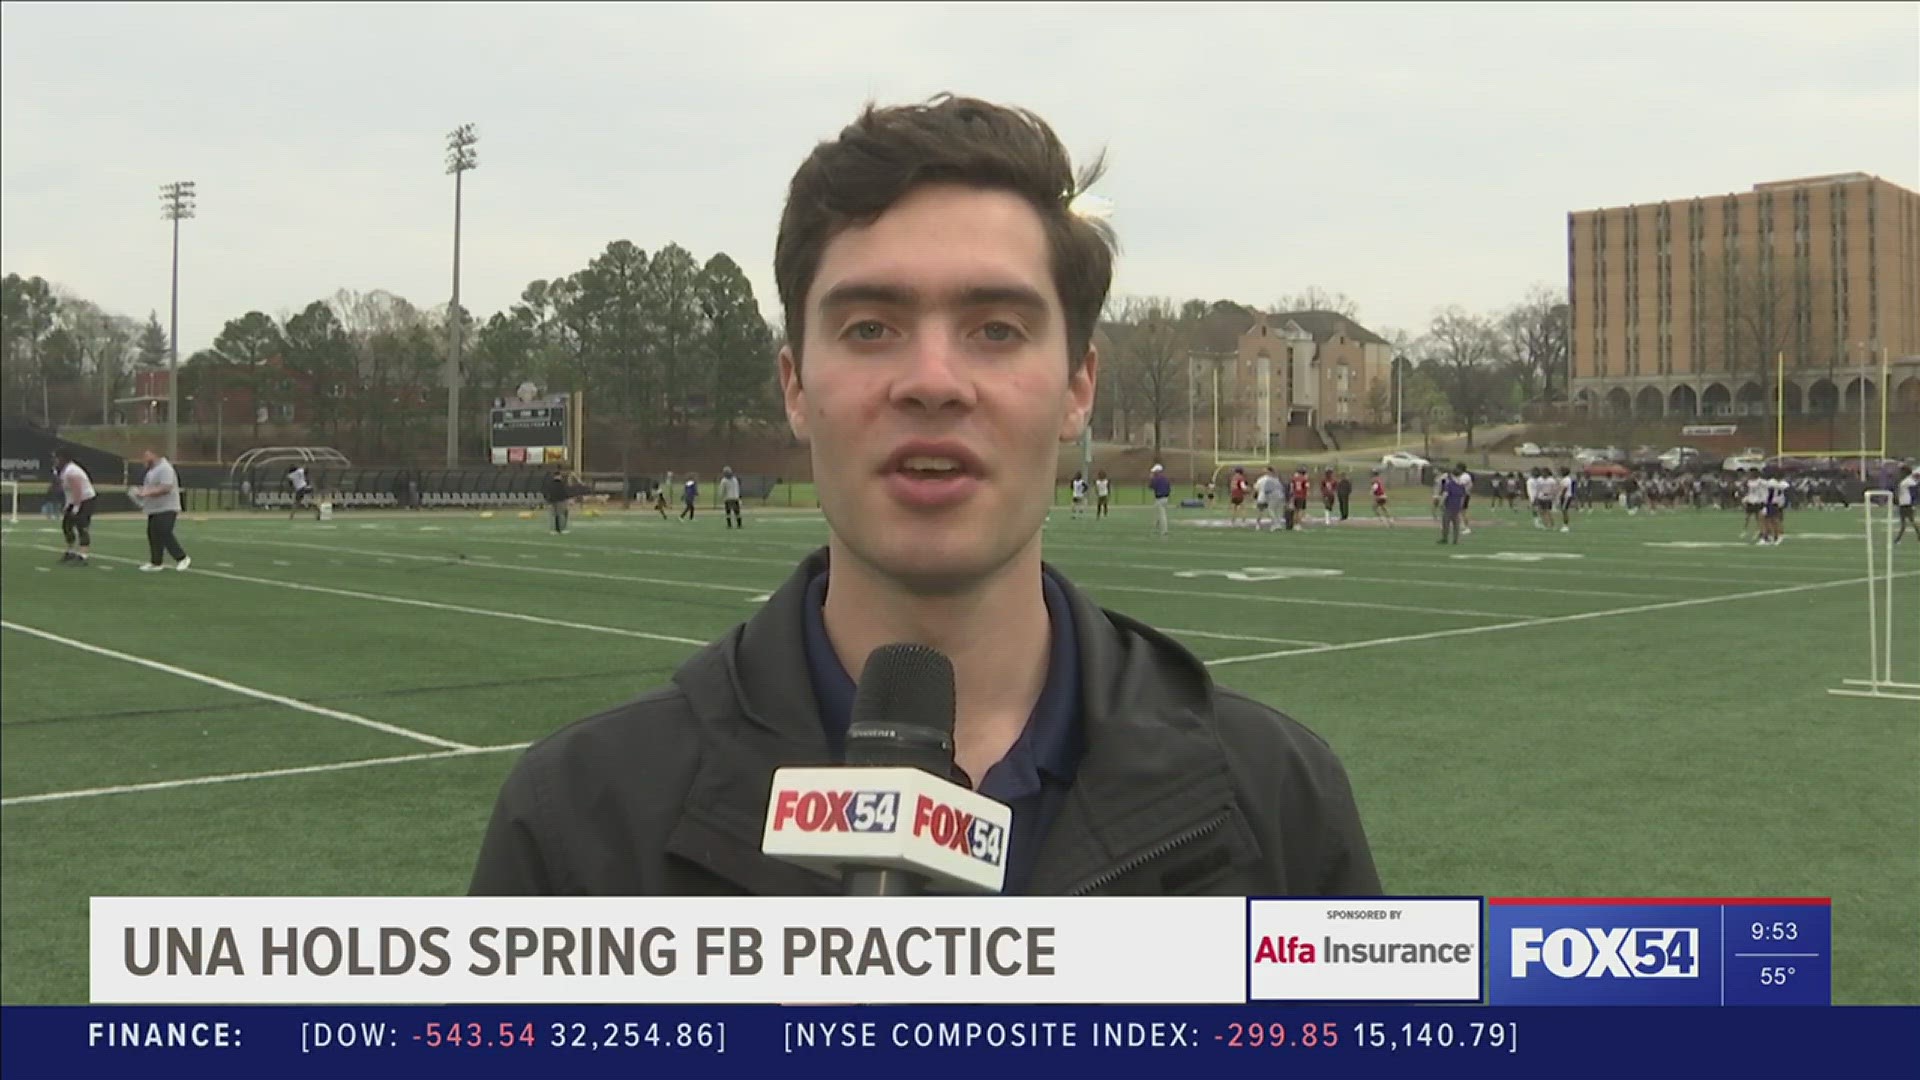 First-year UNA head coach wants to practice hard so the games aren't, uses lessons from pervious coaching gigs